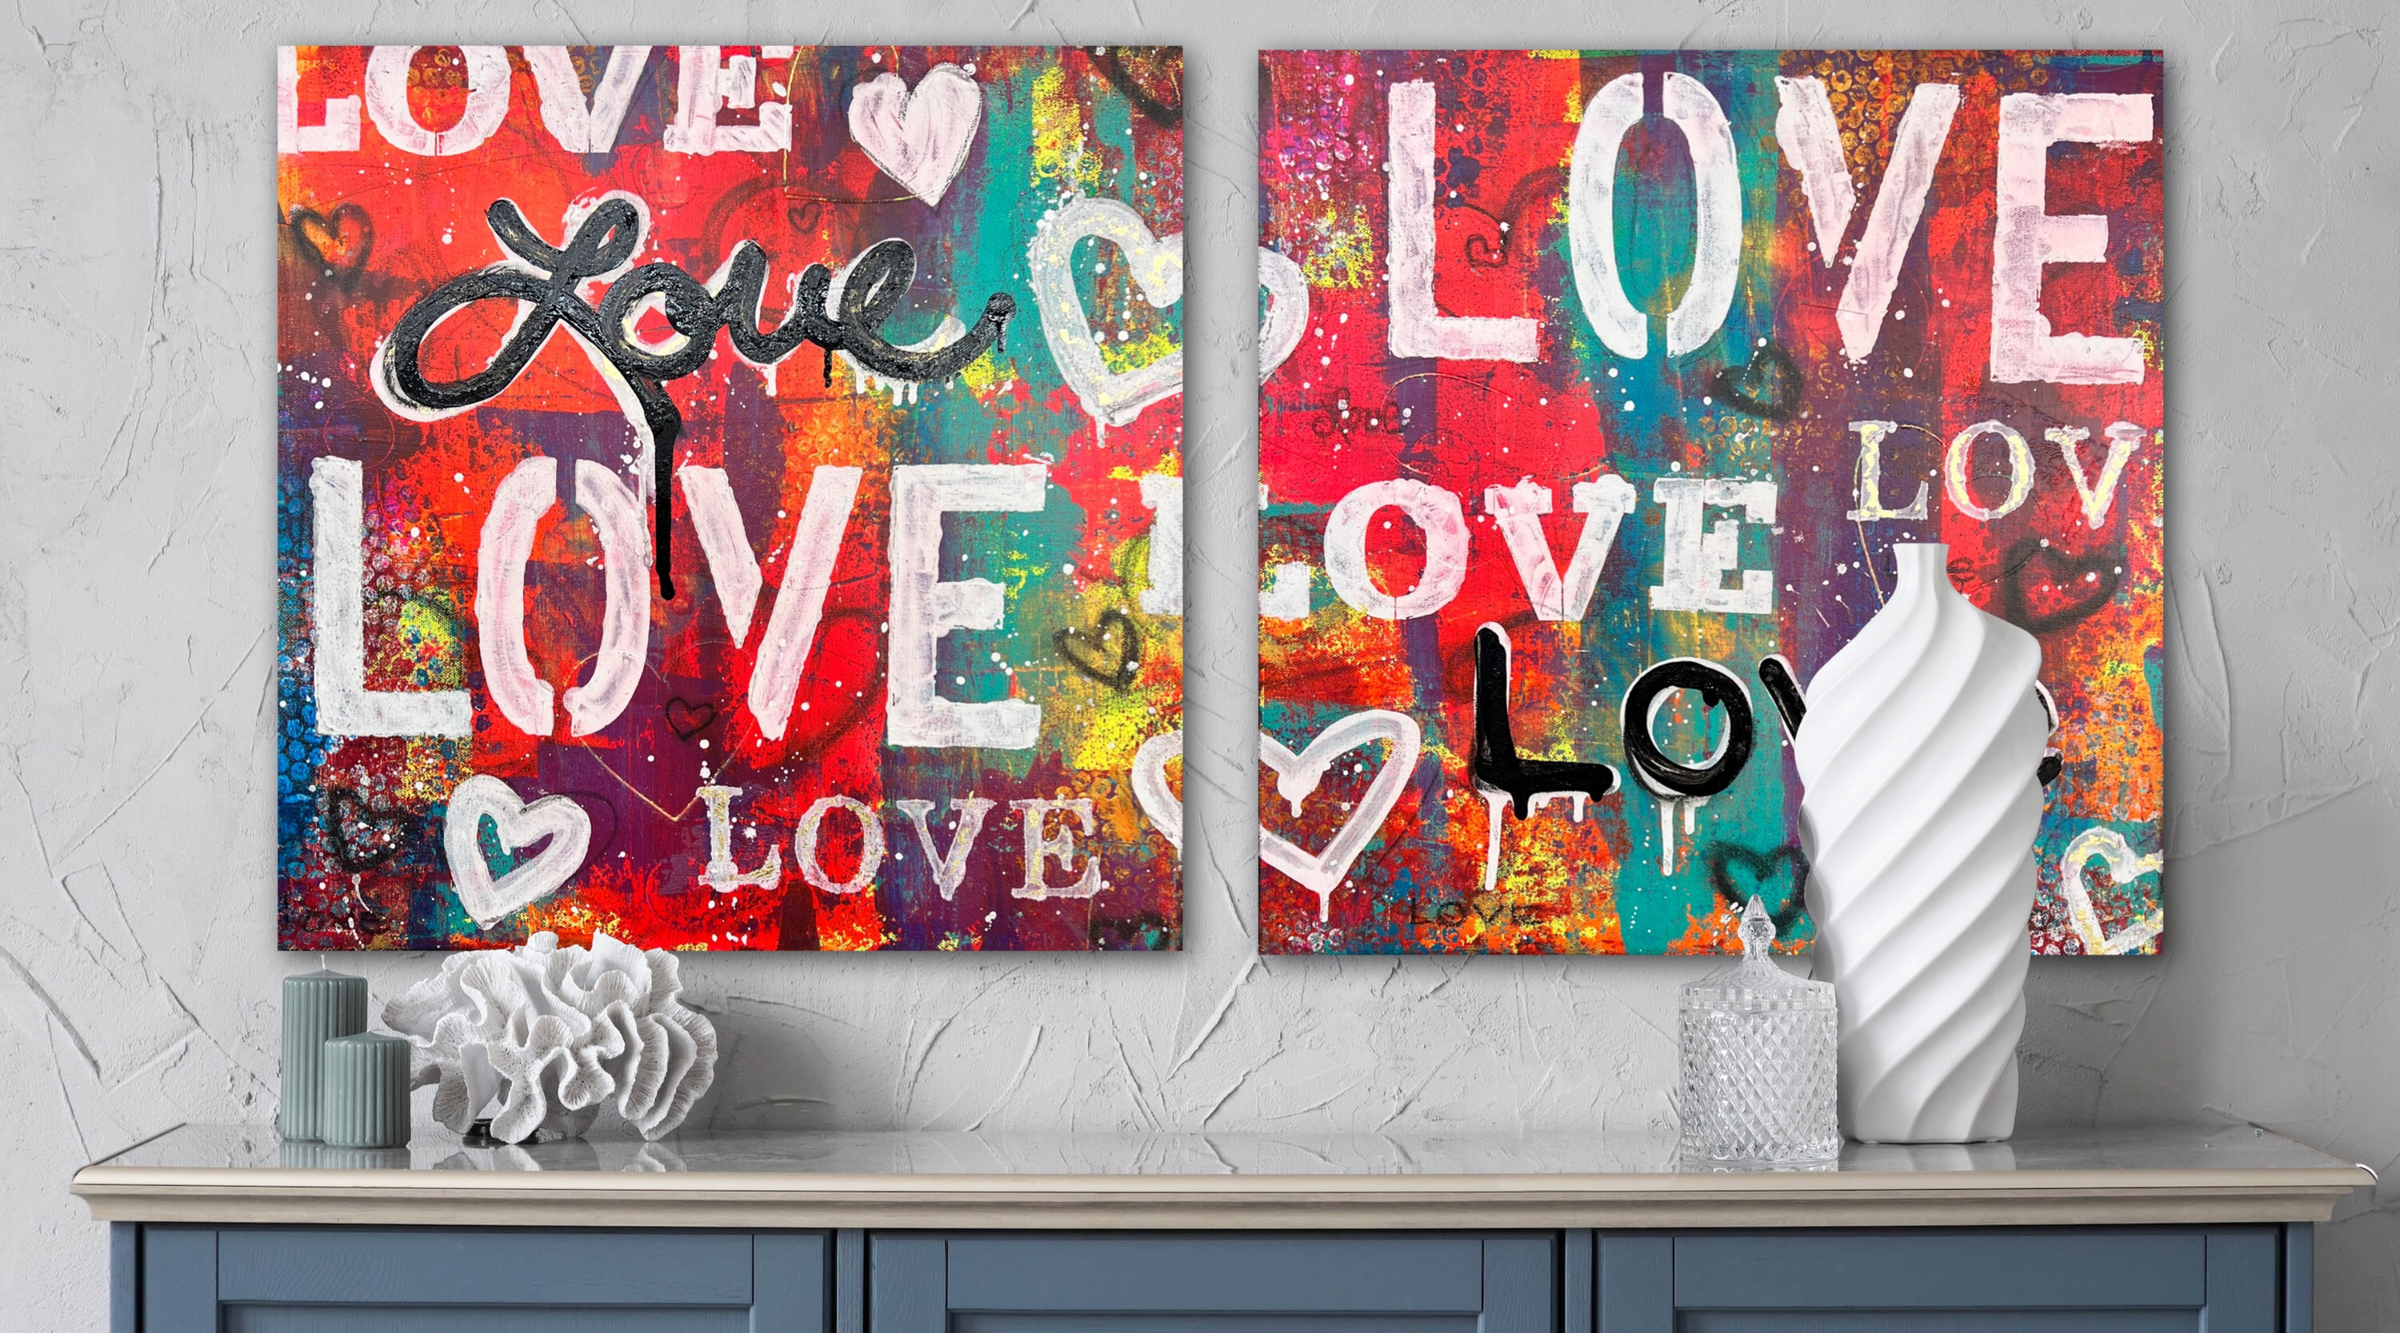 A pair of 'Love' canvas paintings by Shana Recker hung on the wall.